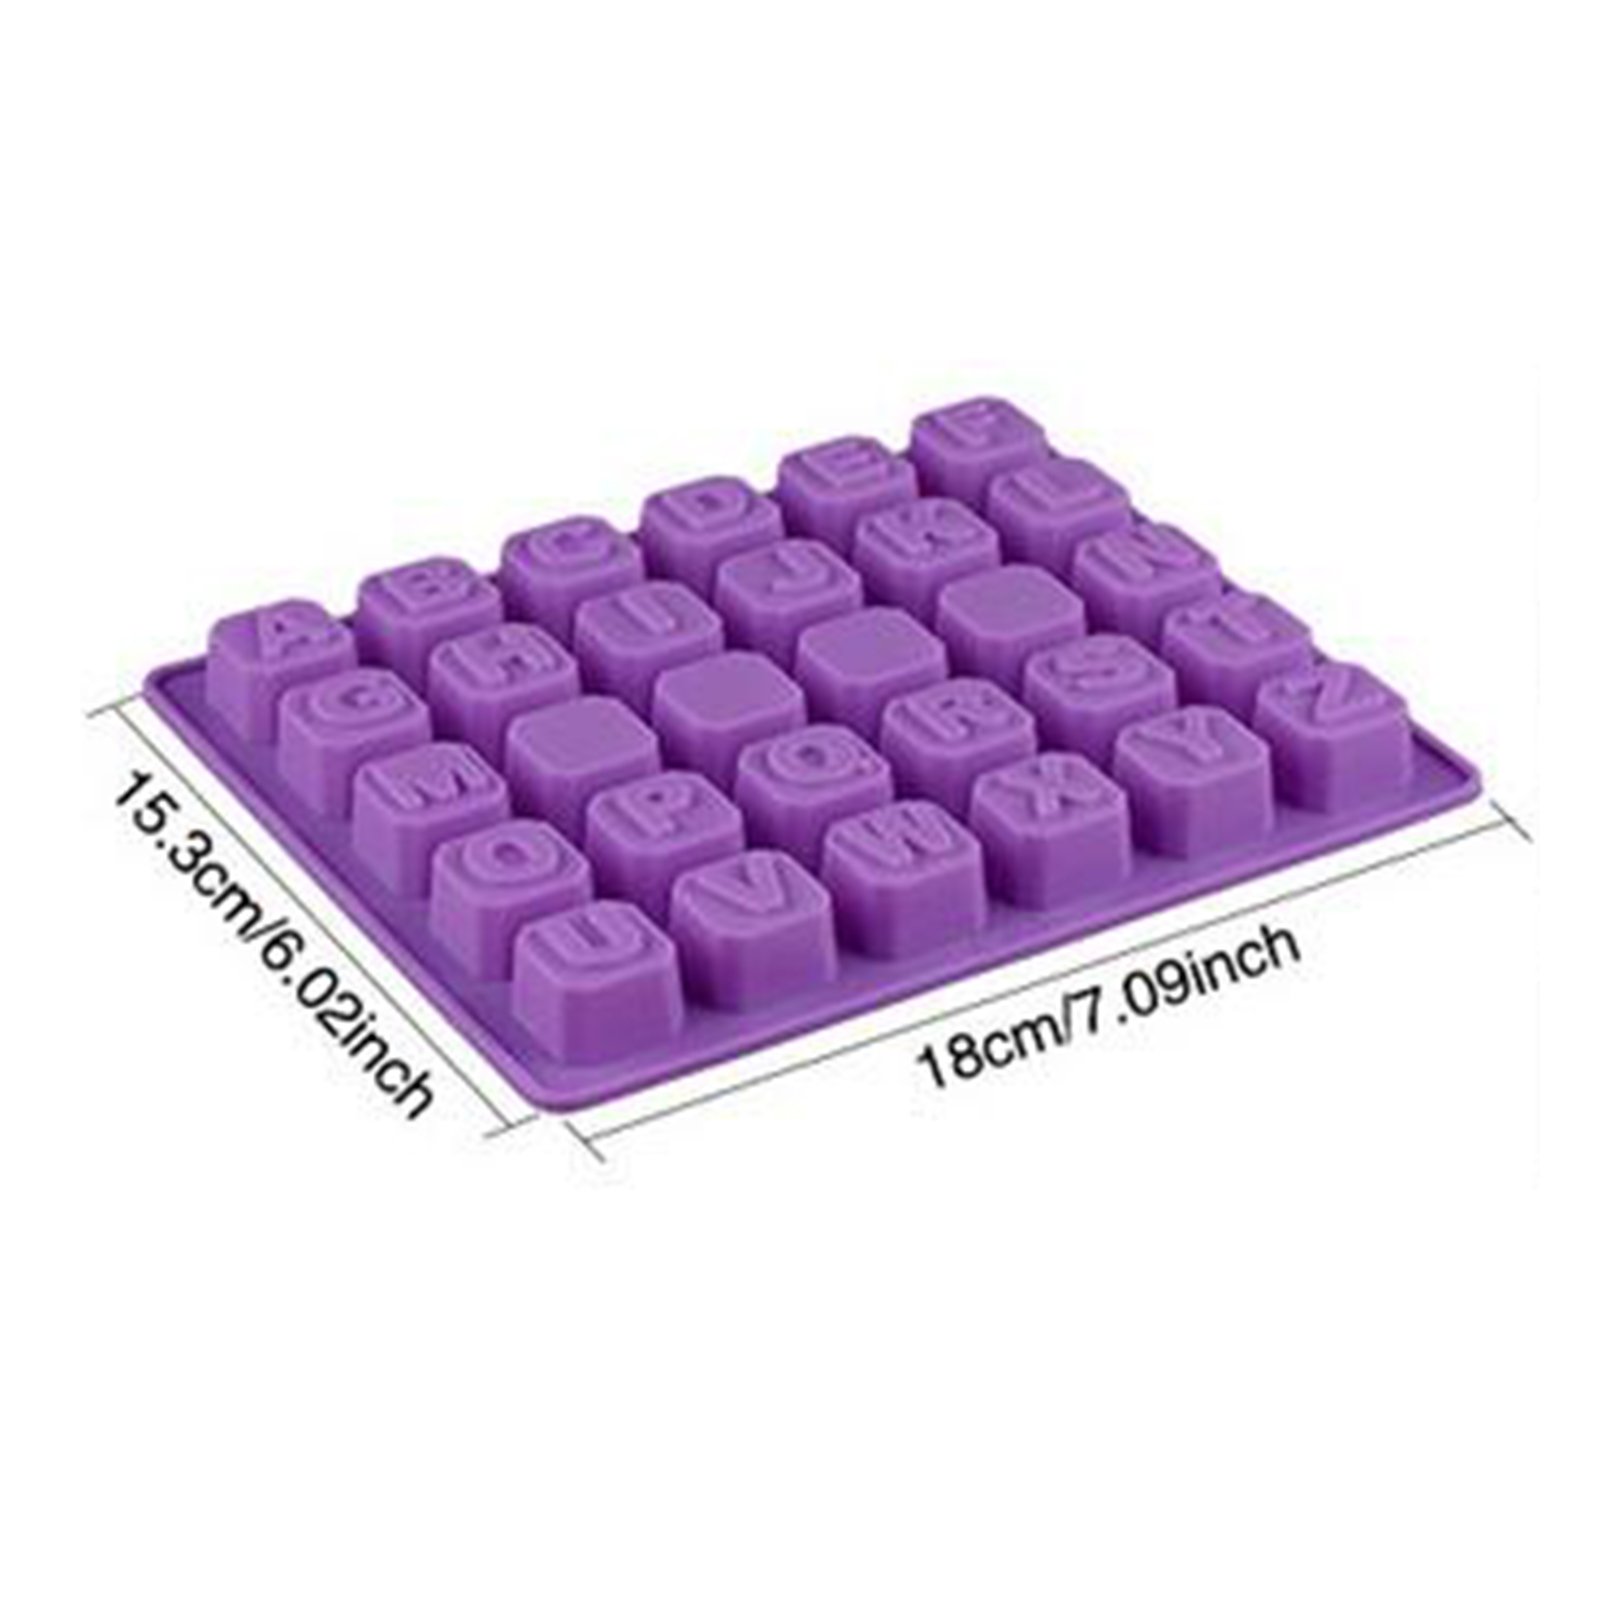 Wocuz 26 Large Letters Silicone Mold Alphabet Crayon Mold Chocolate Mold Biscuit Ice Cube Tray with 12 Sets of Present Packages for DIY Name Letter